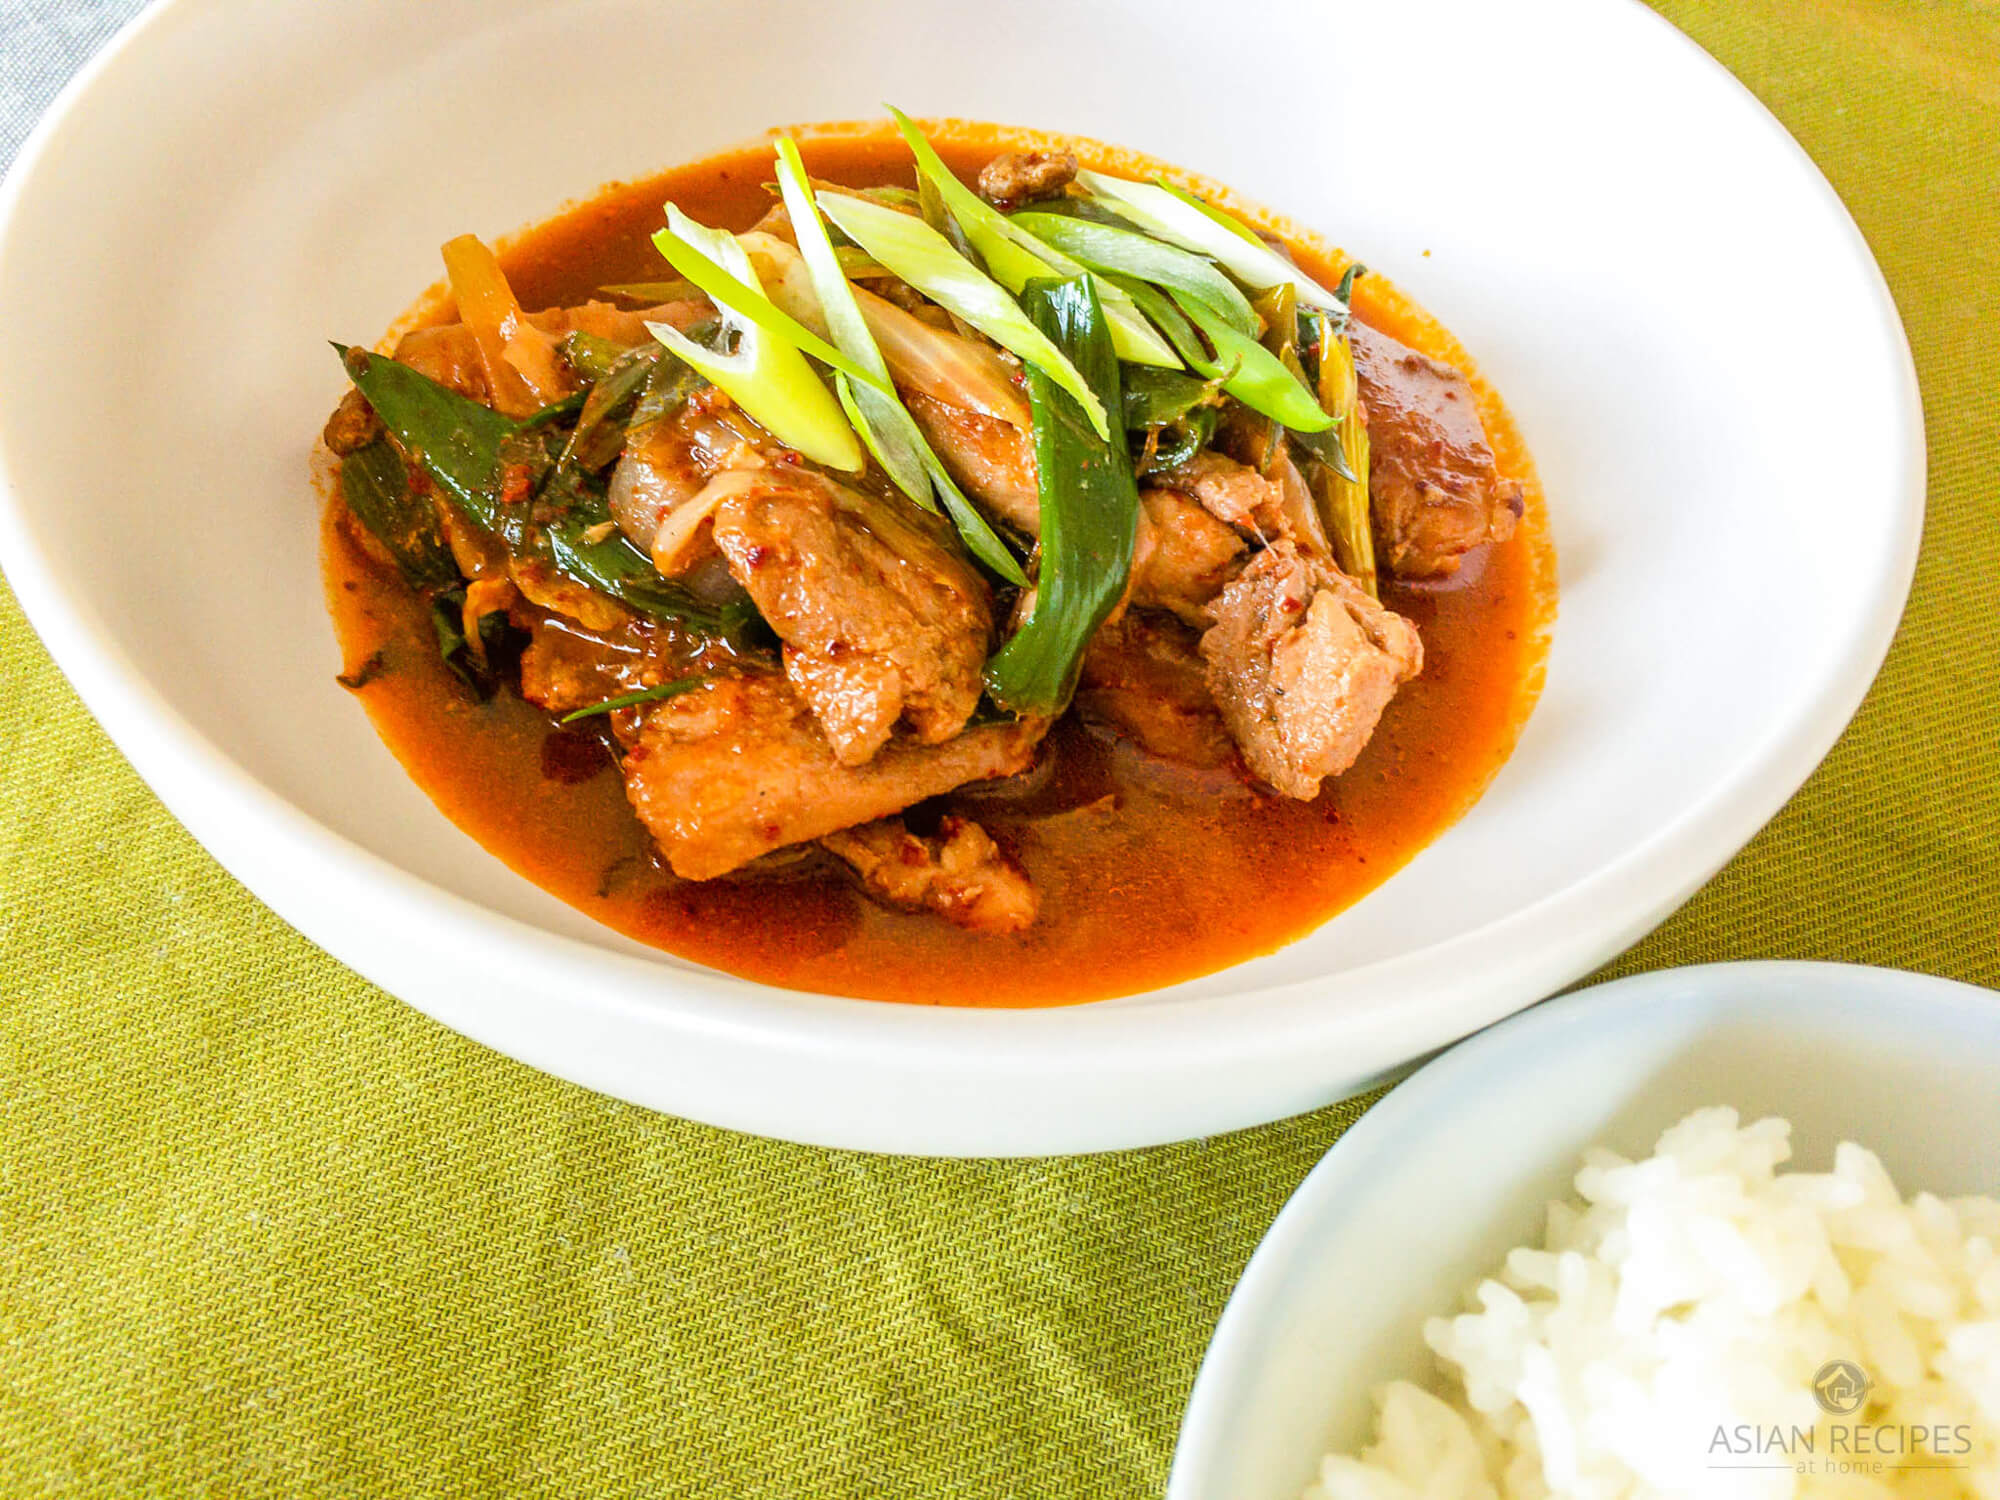 This flavorful stew recipe is made with boneless chicken thighs that are first marinated in a spicy Korean-style marinade.